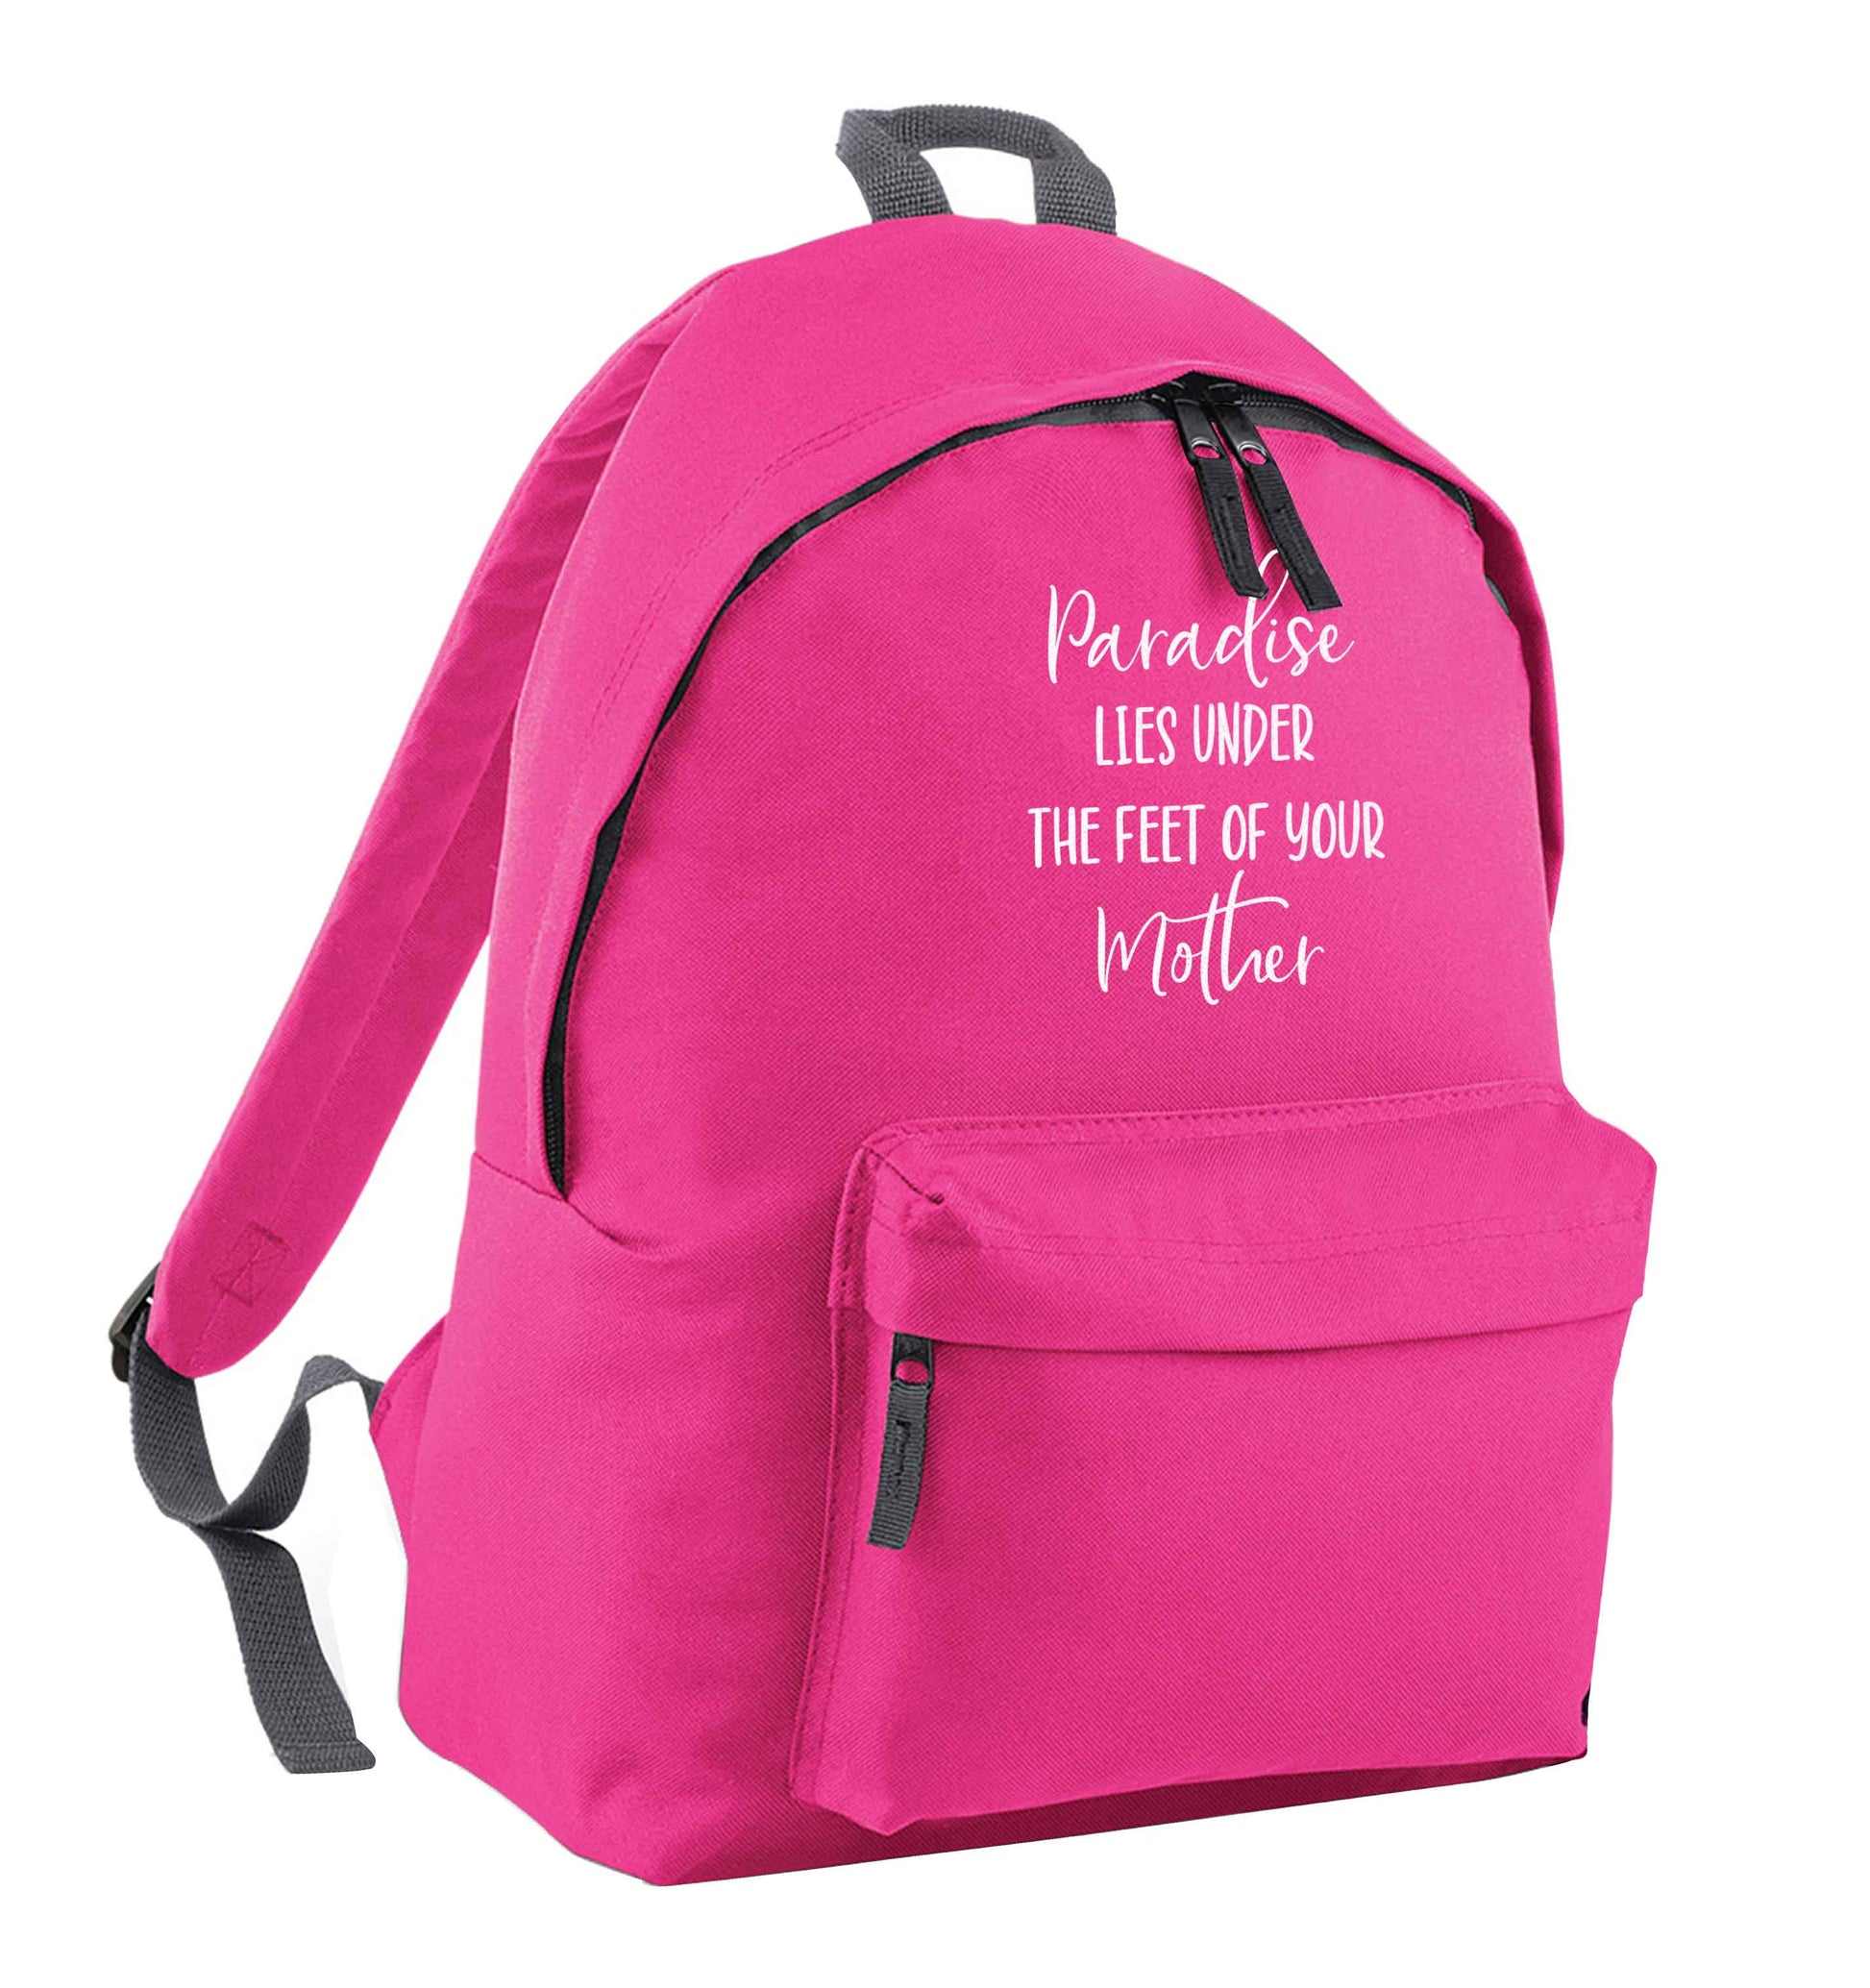 Paradise lies under the feet of your mother pink adults backpack